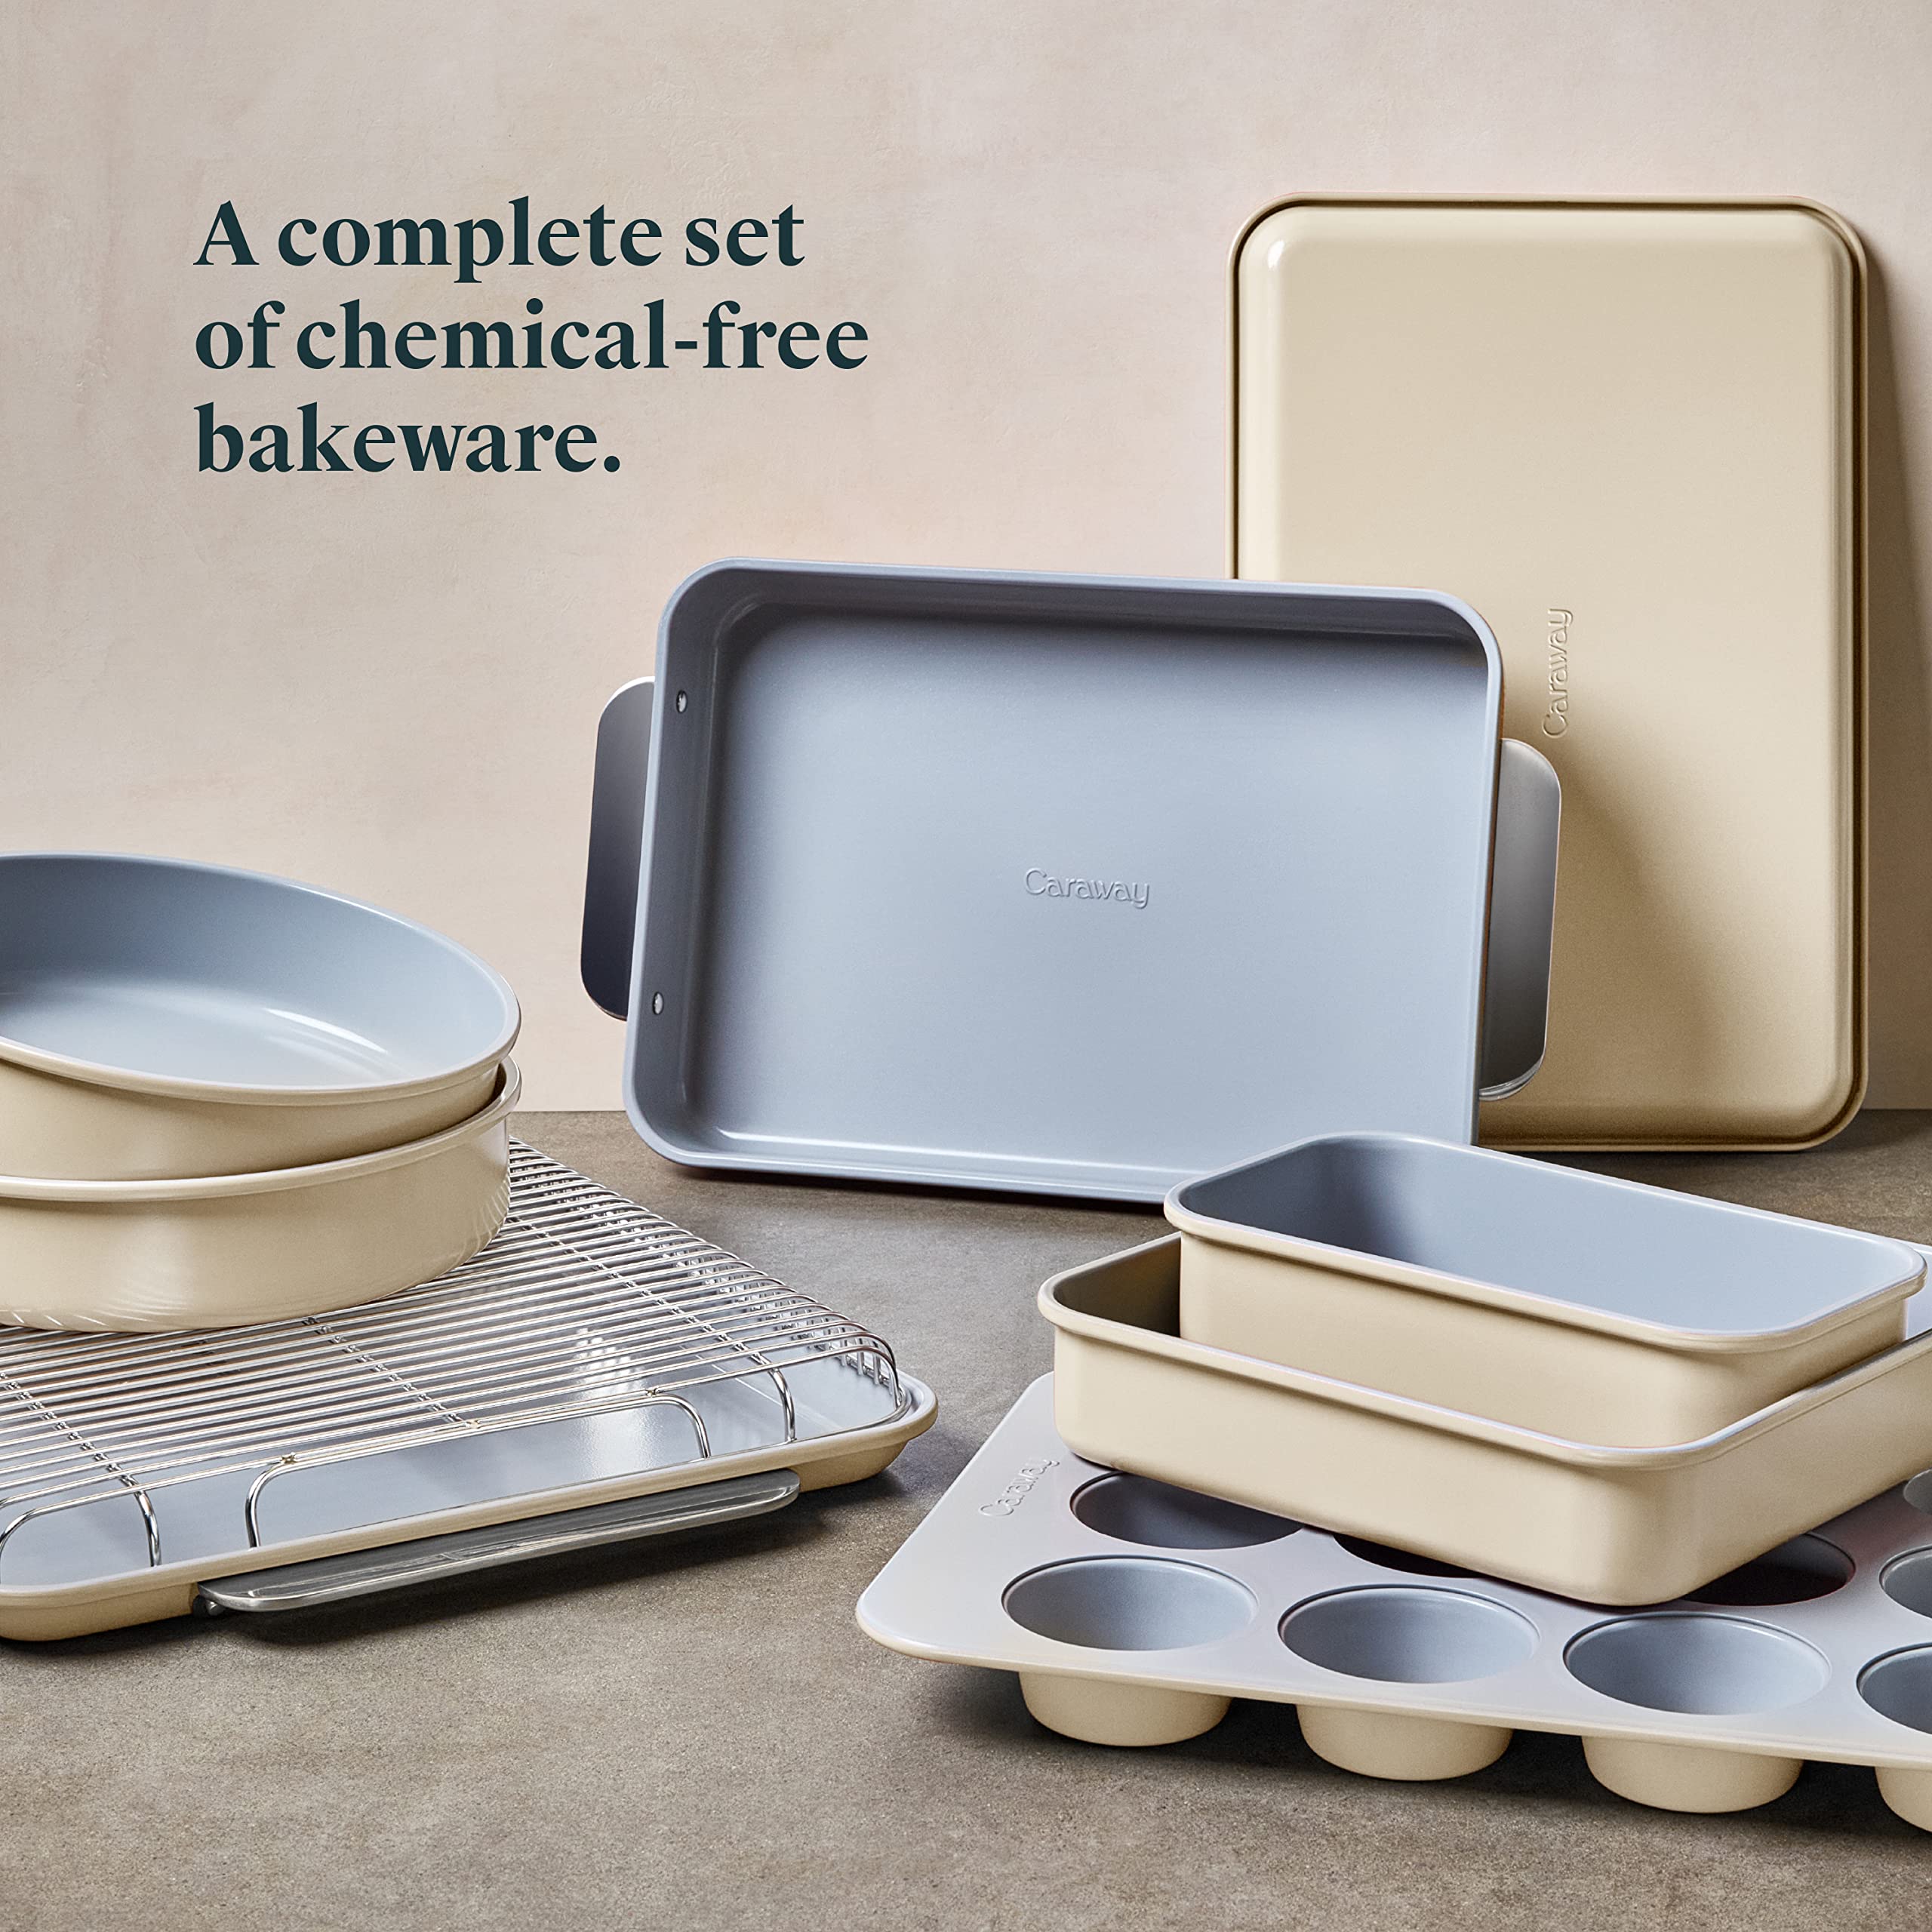 Caraway Nonstick Ceramic Bakeware Set (11 Pieces) - Baking Sheets, Assorted Baking Pans, Cooling Rack, & Storage - Aluminized Steel Body - Non Toxic, PTFE & PFOA Free - Cream